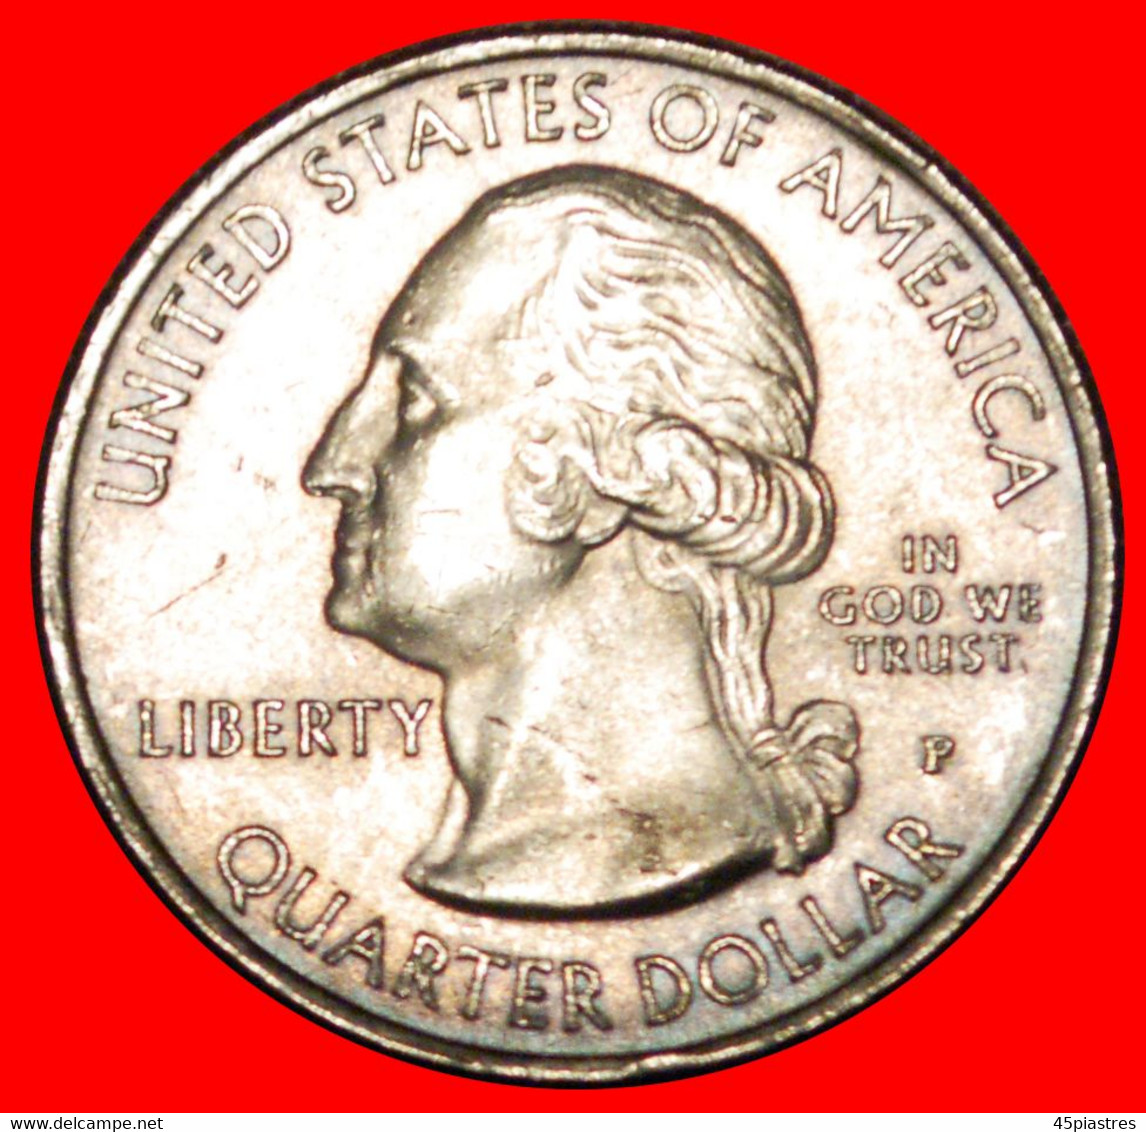 * CORN, HOUSE, WELL: USA★1/4 DOLLAR 2015P UNC FROM ROLLS! BEST OF VARIETY! WASHINGTON 1789-1797★LOW START ★ NO RESERVE! - Erreurs